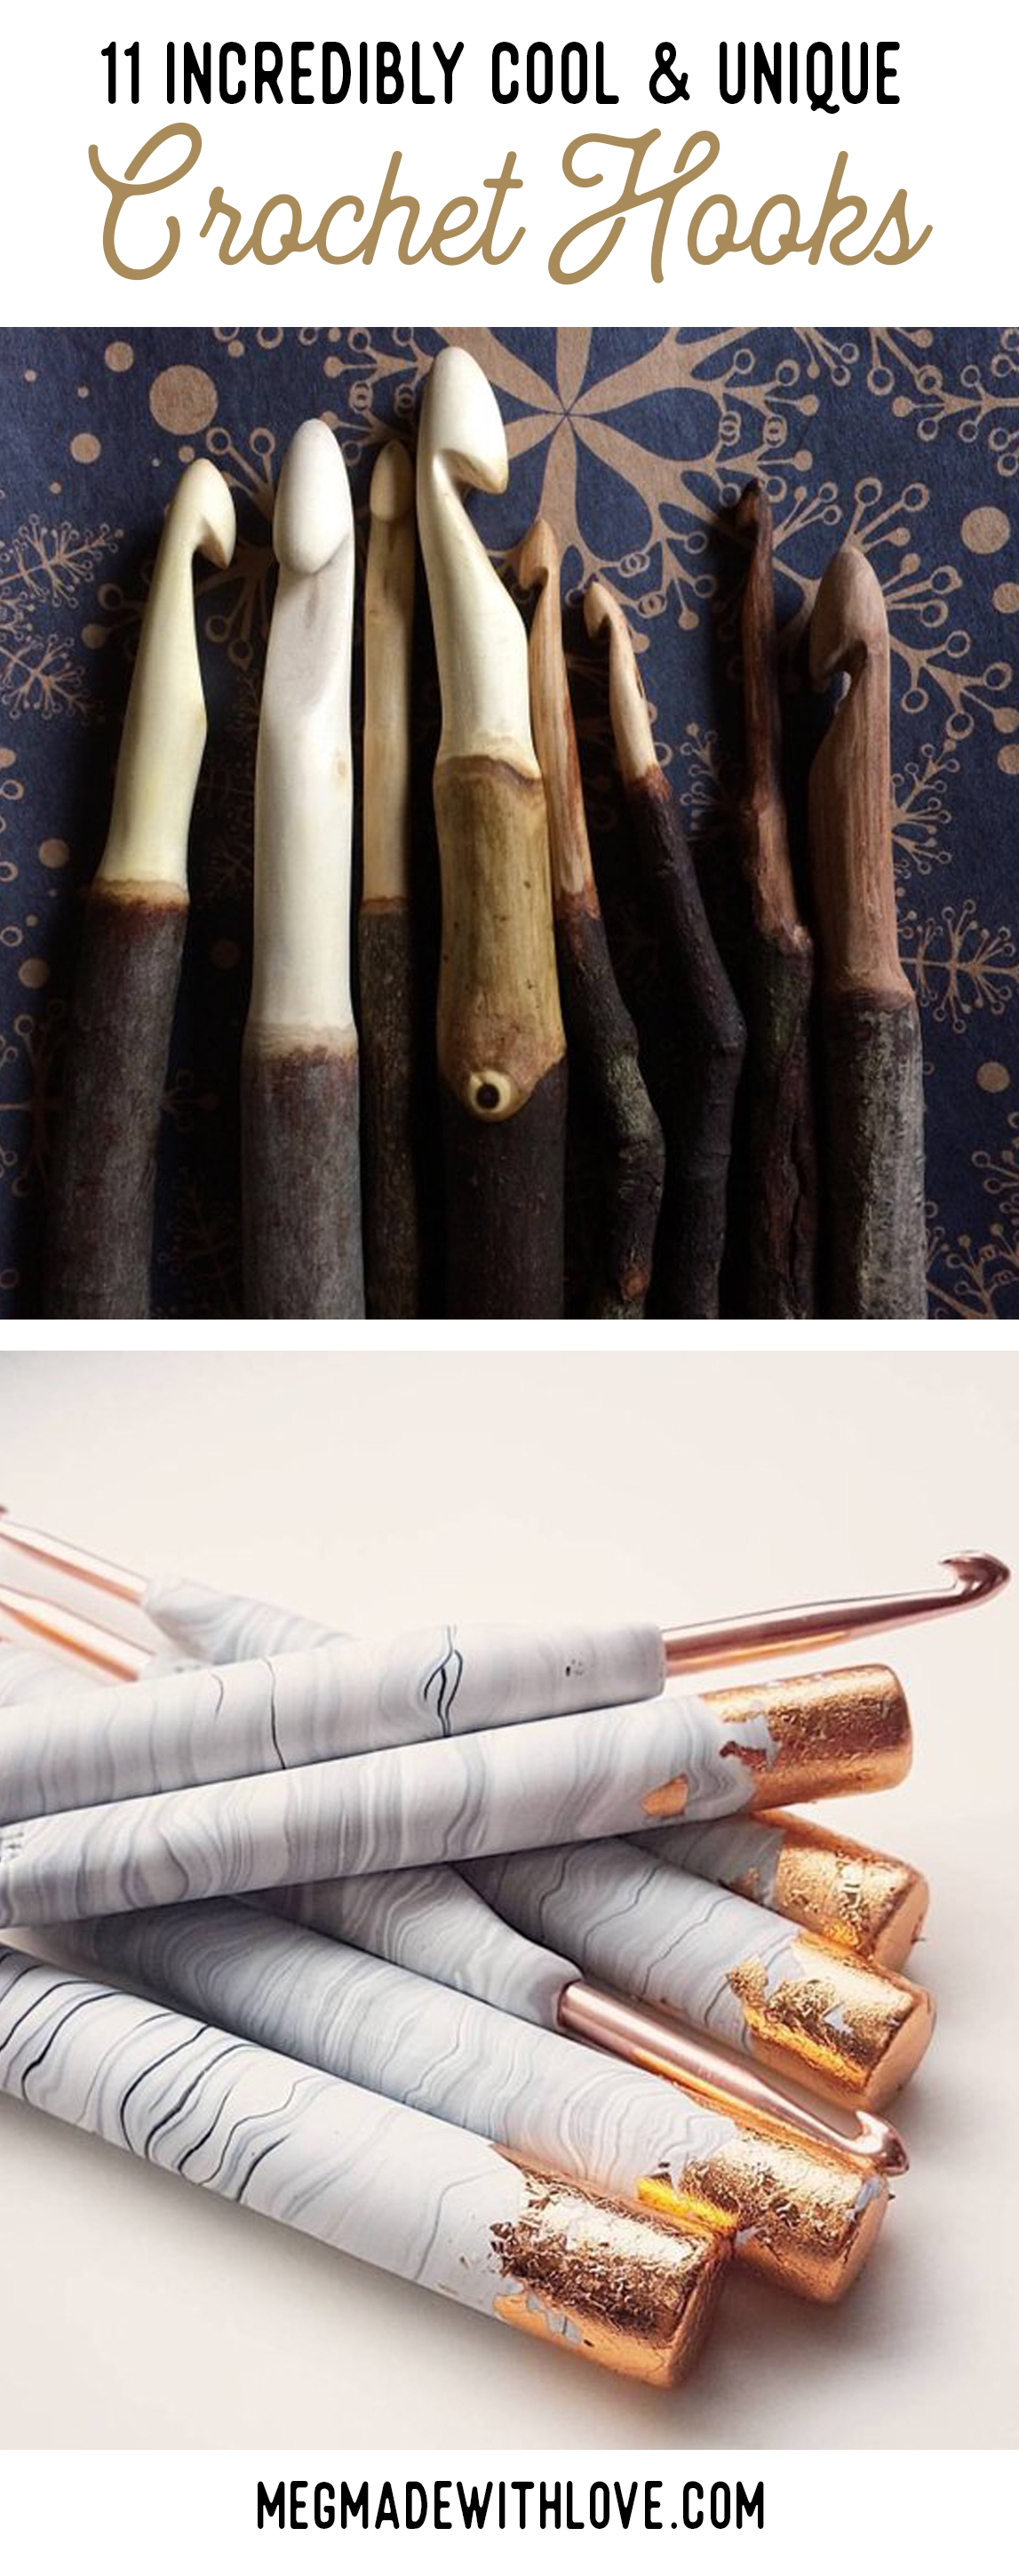 A Few Super Cool Crochet Hooks I am Loving Right Now — Megmade with Love